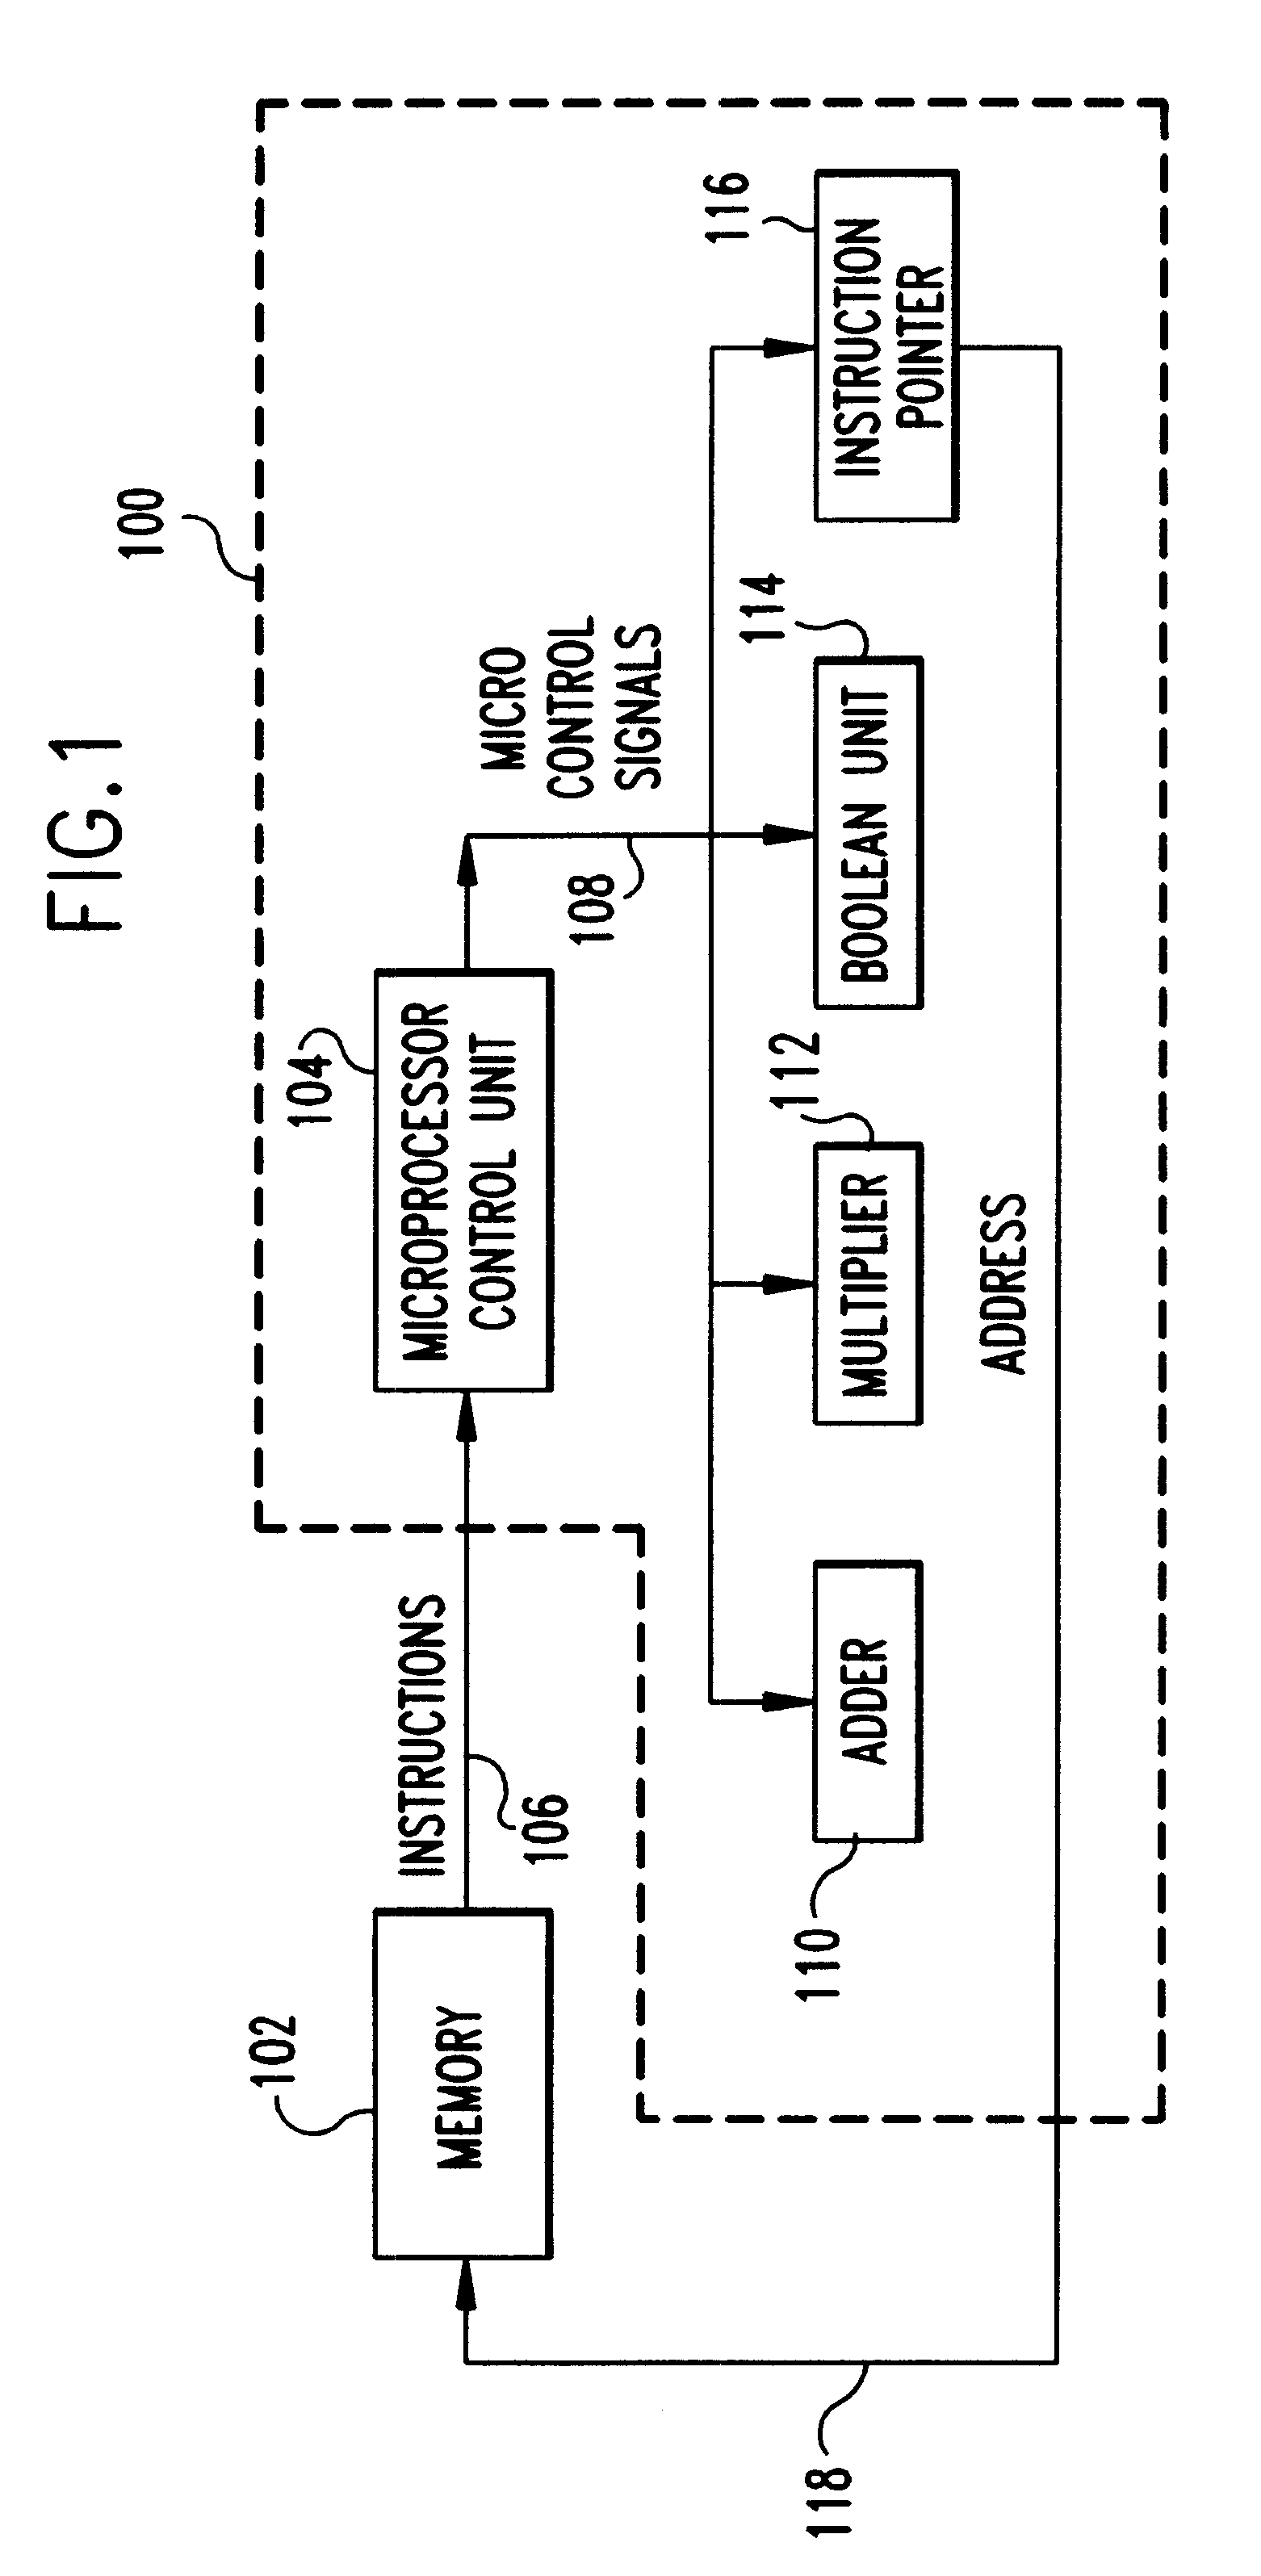 System and method for temporally controlling instruction execution